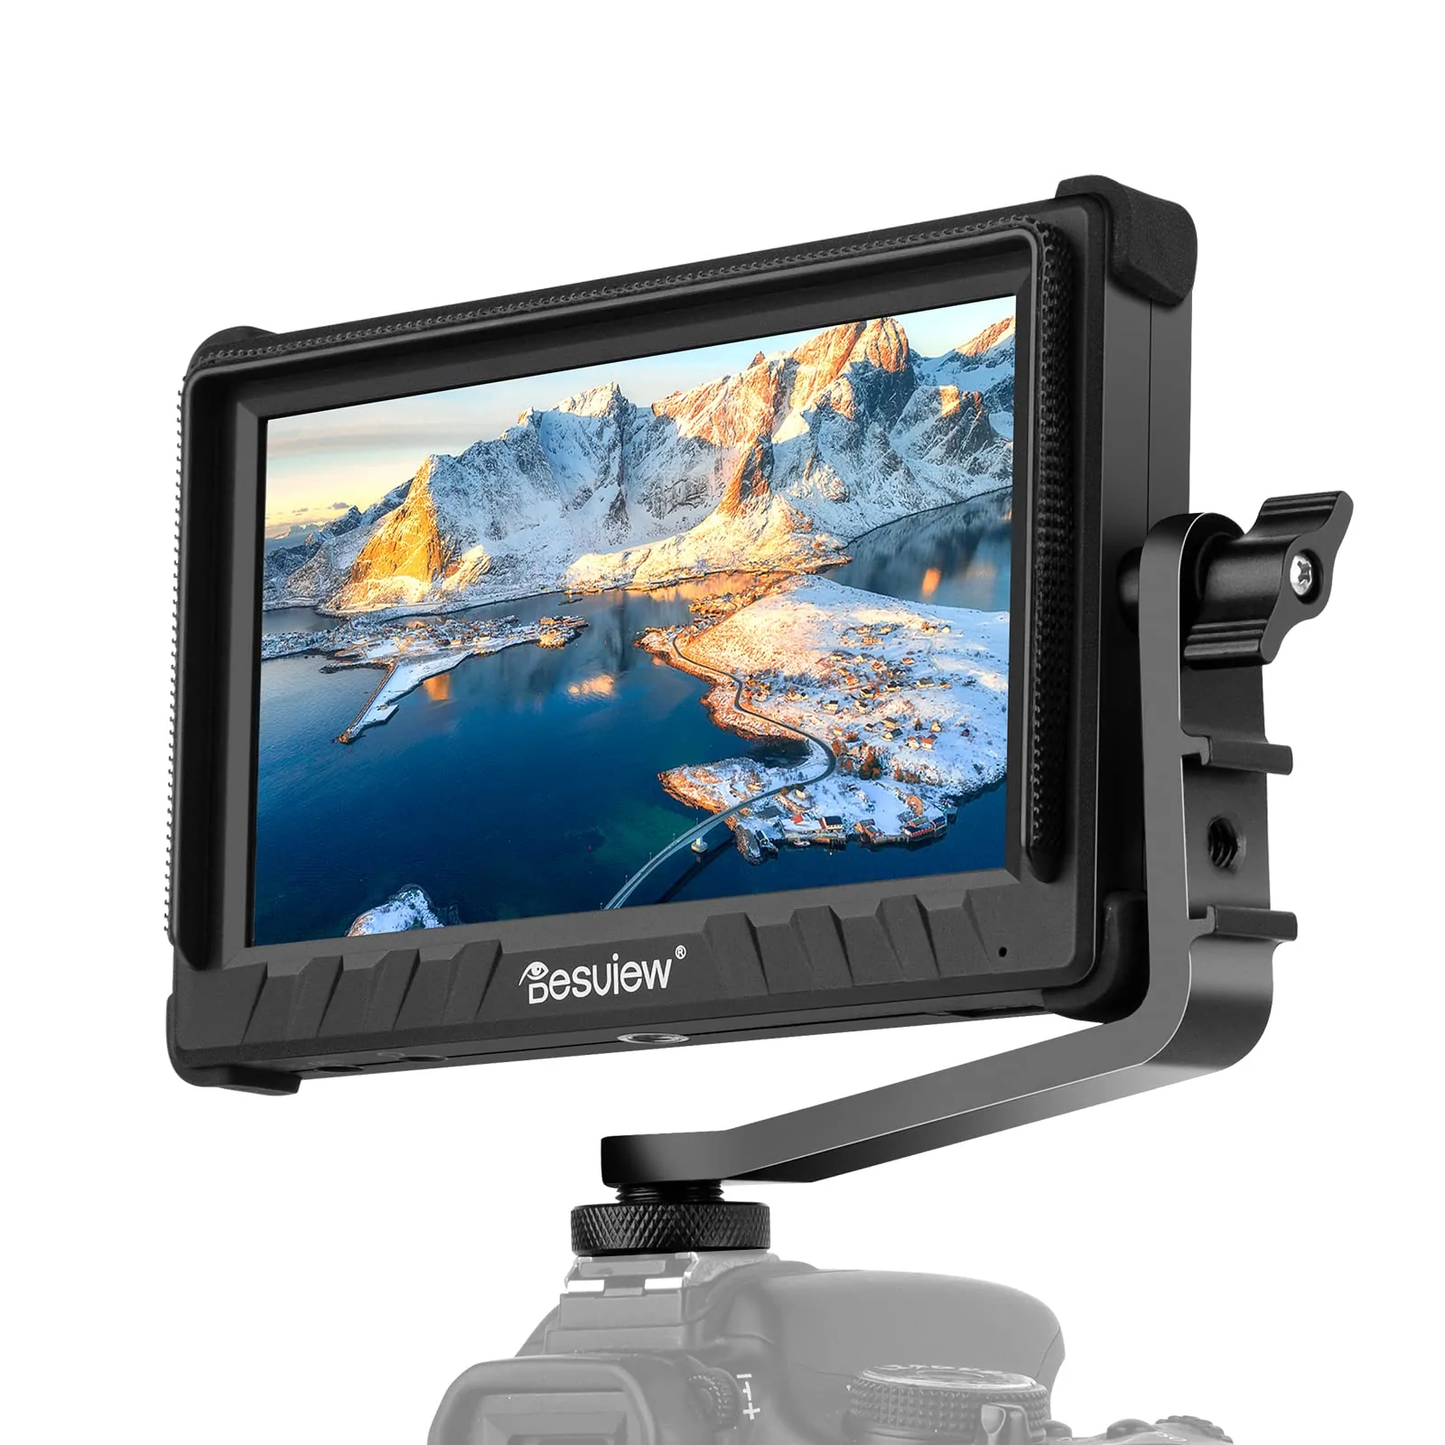 Desview / Bestview P5II 5.5-Inch HDR Touchscreen Camera Field Monitor with HB 800nits, 4K HDMI 1920 x 1080 Resolution and Custom 3D LUTs for DSLR and Mirrorless Cameras